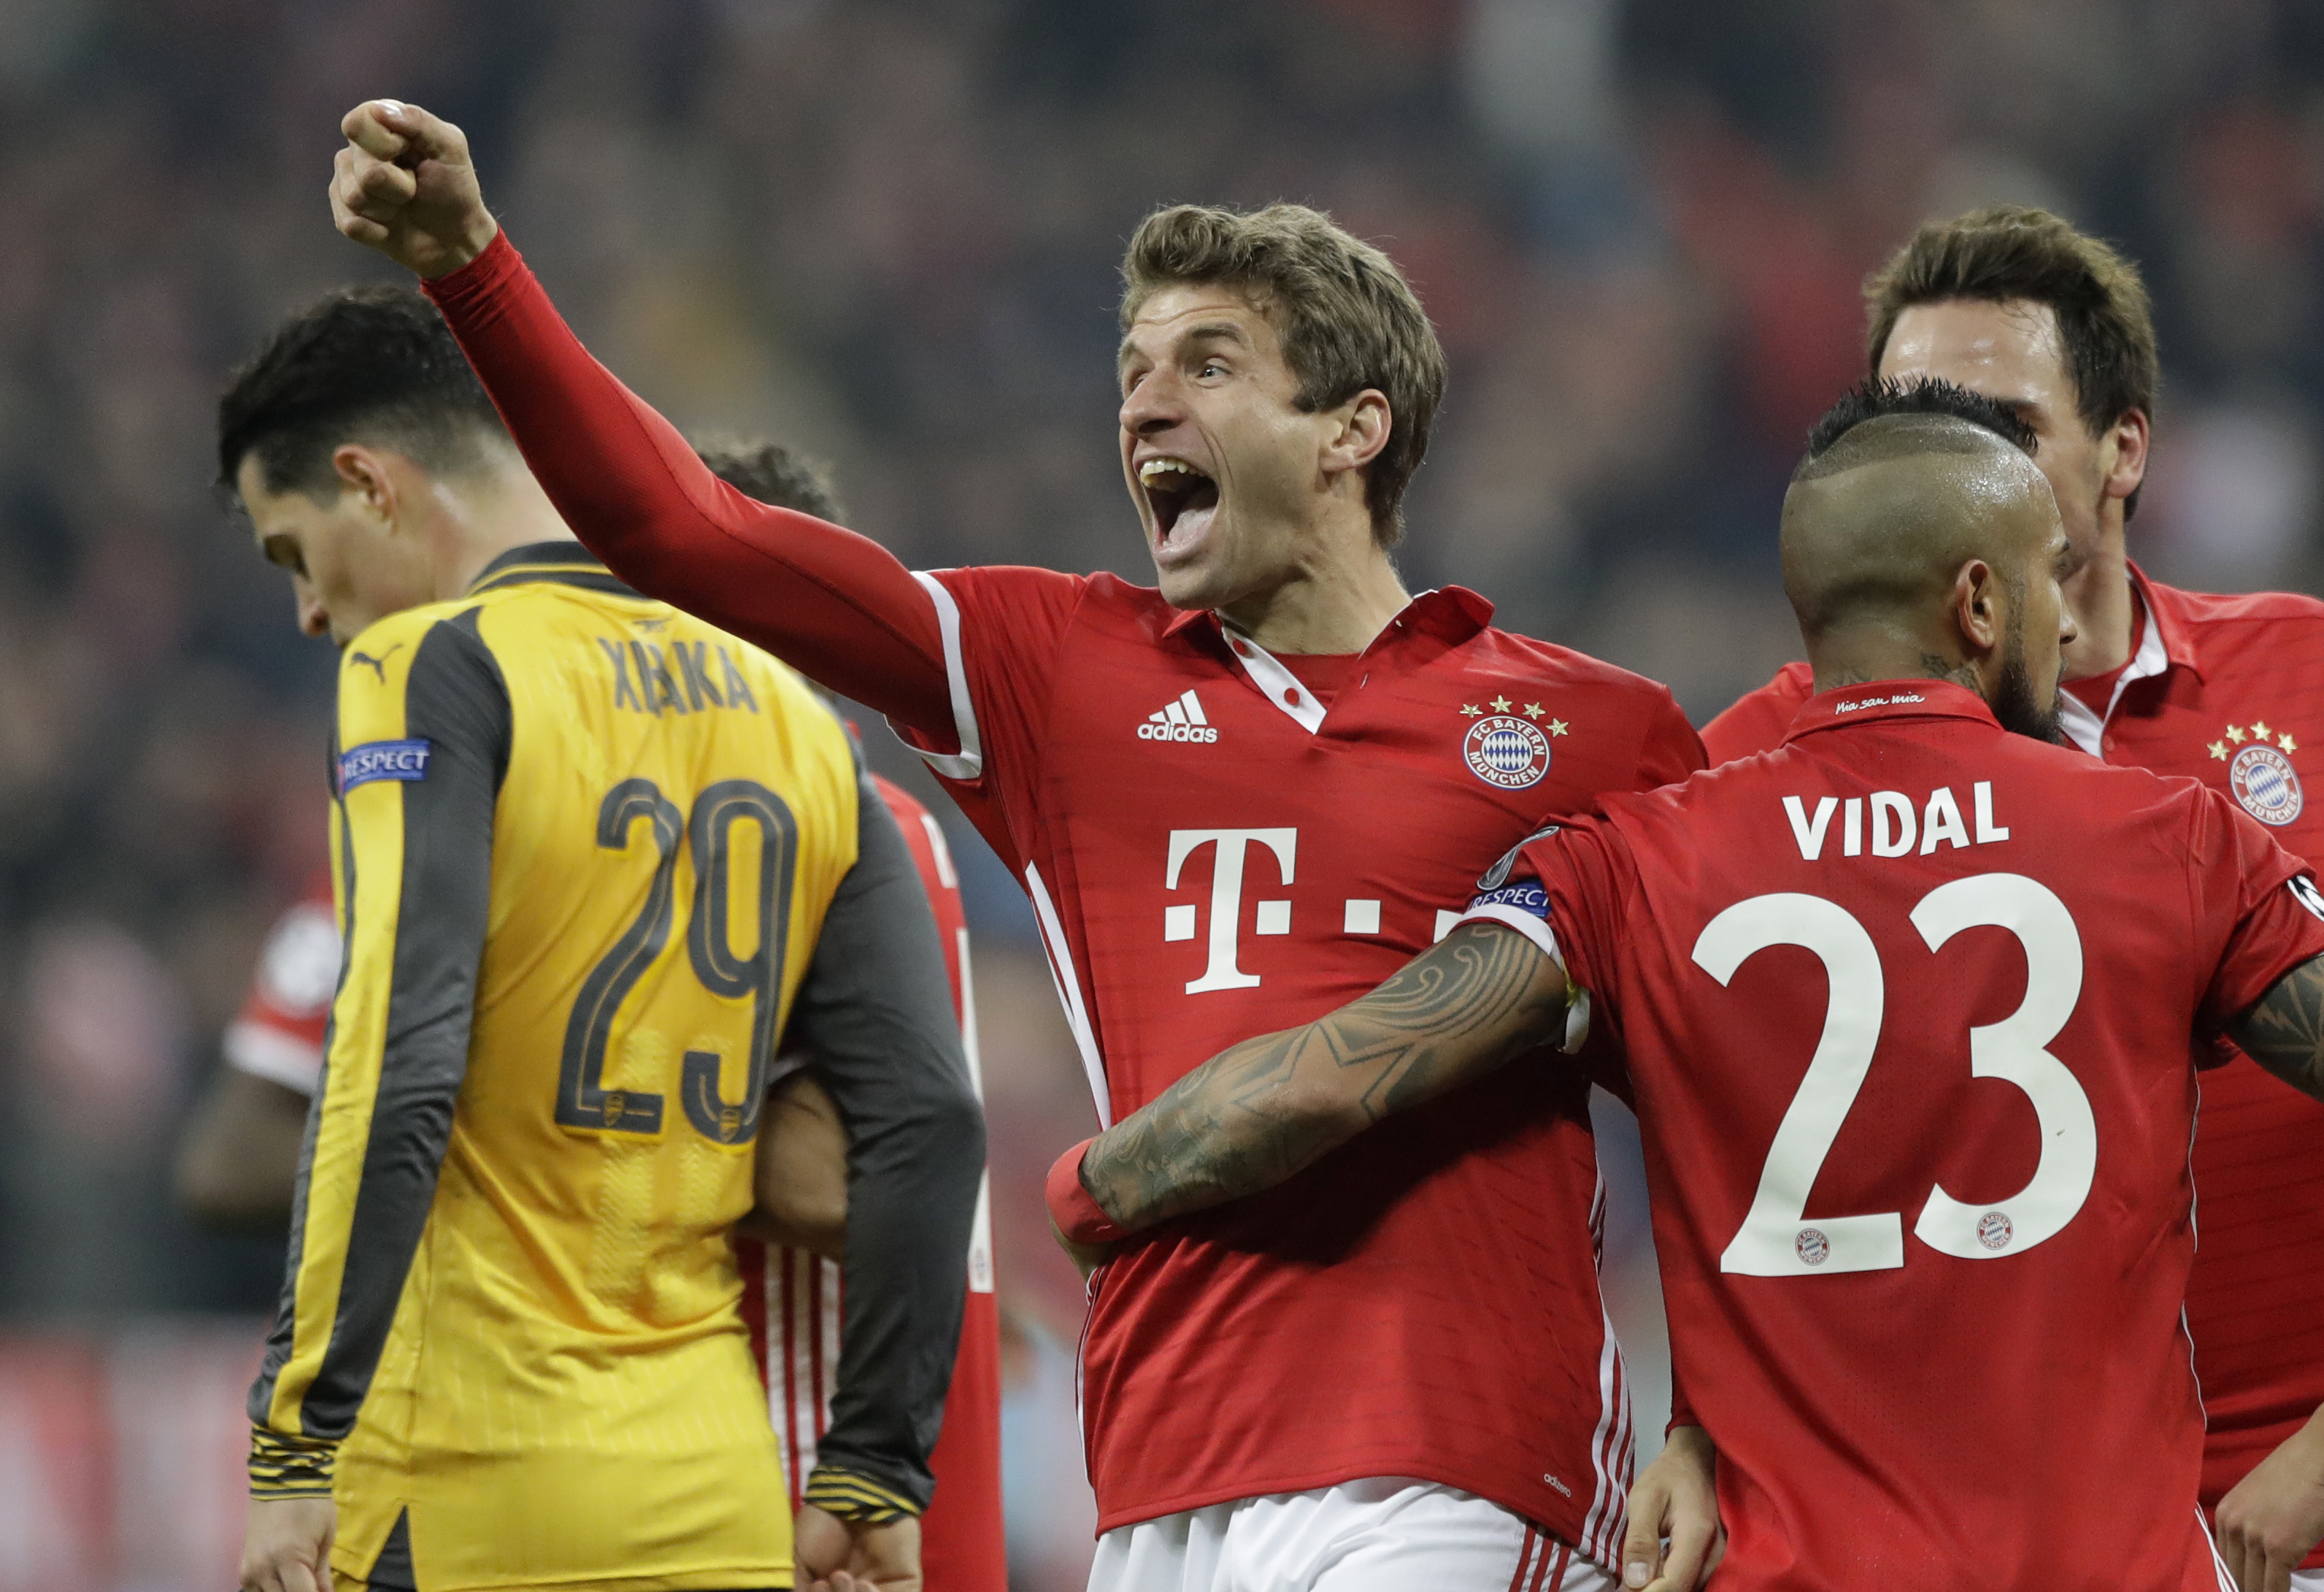 Bayern's Thomas Mueller, center, celebrates after scoring his side's fifth goal during the Champions League round of 16 first leg soccer match between FC Bayern Munich and Arsenal, in Munich, Germany, Wednesday, Feb. 15, 2017. (AP Photo/Matthias Schrader)